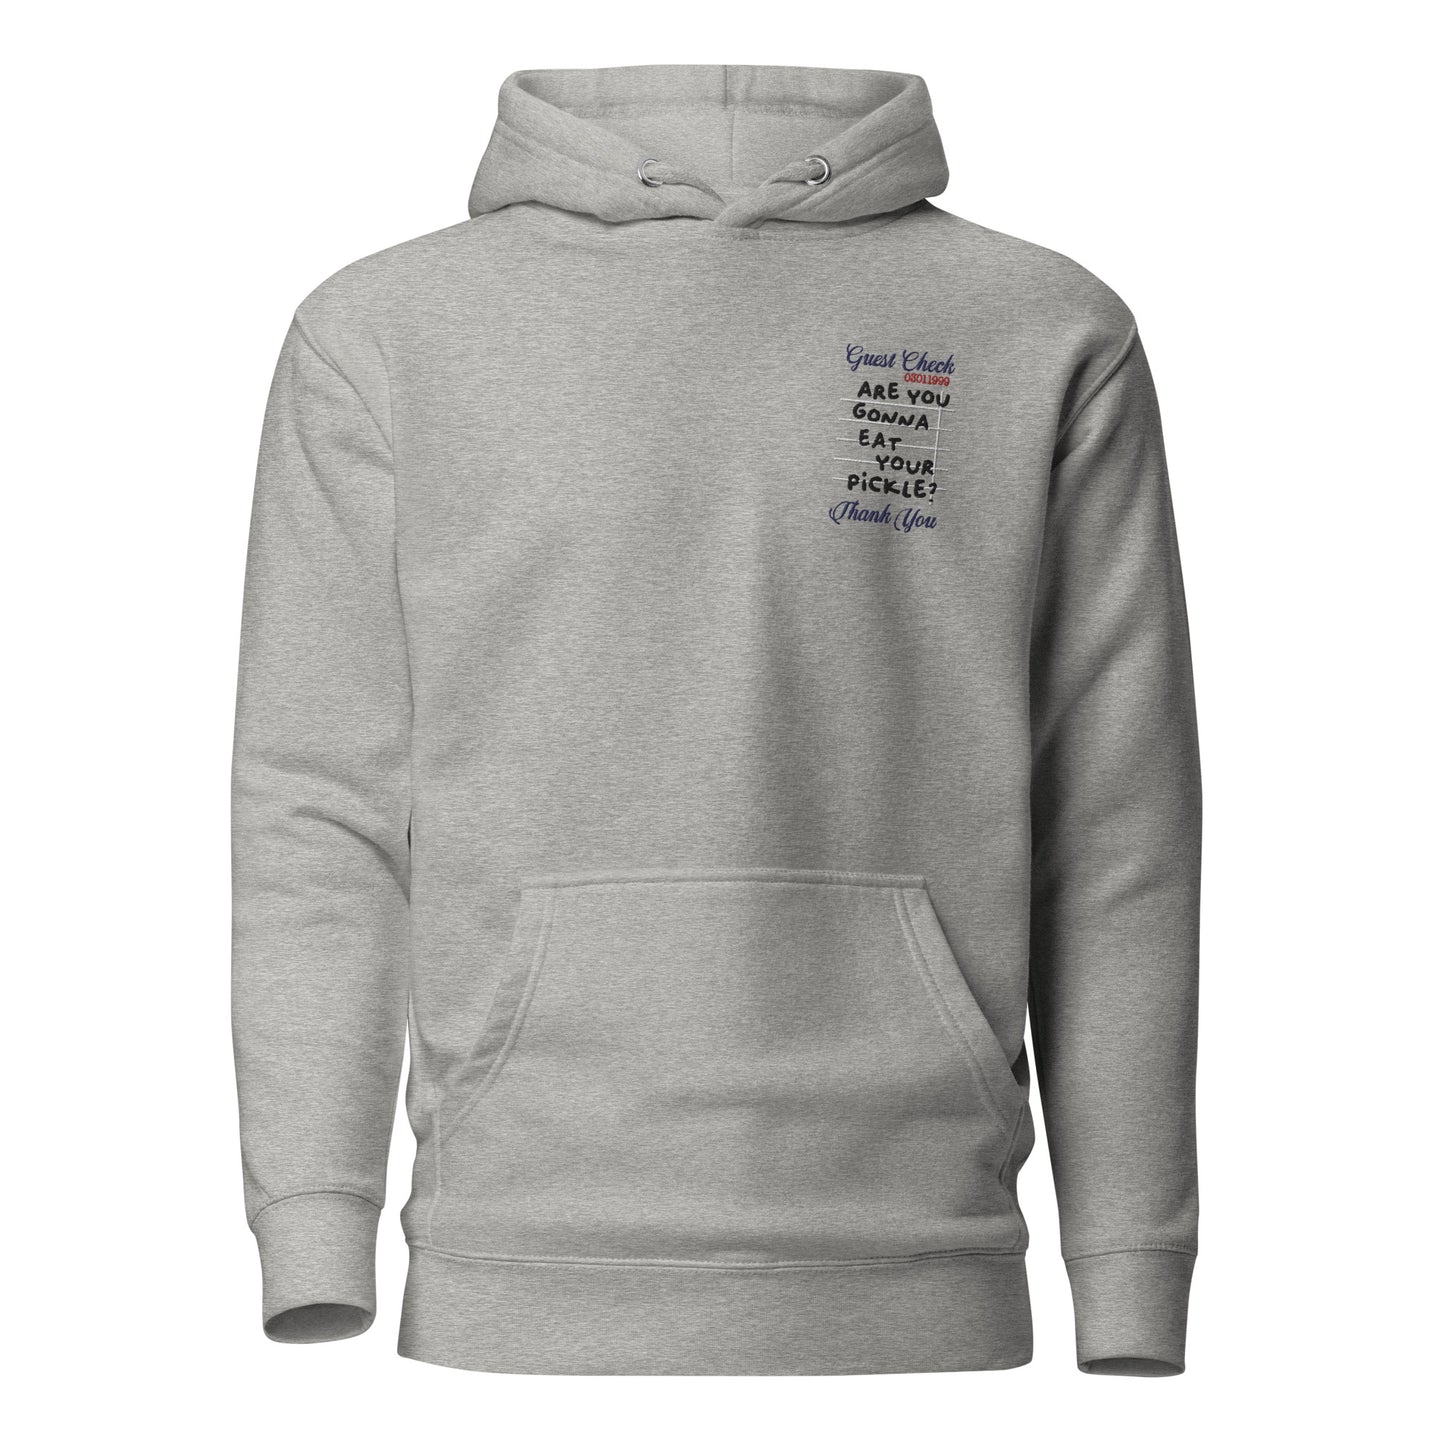 Are You Gonna Eat Your Pickle? Hoodie